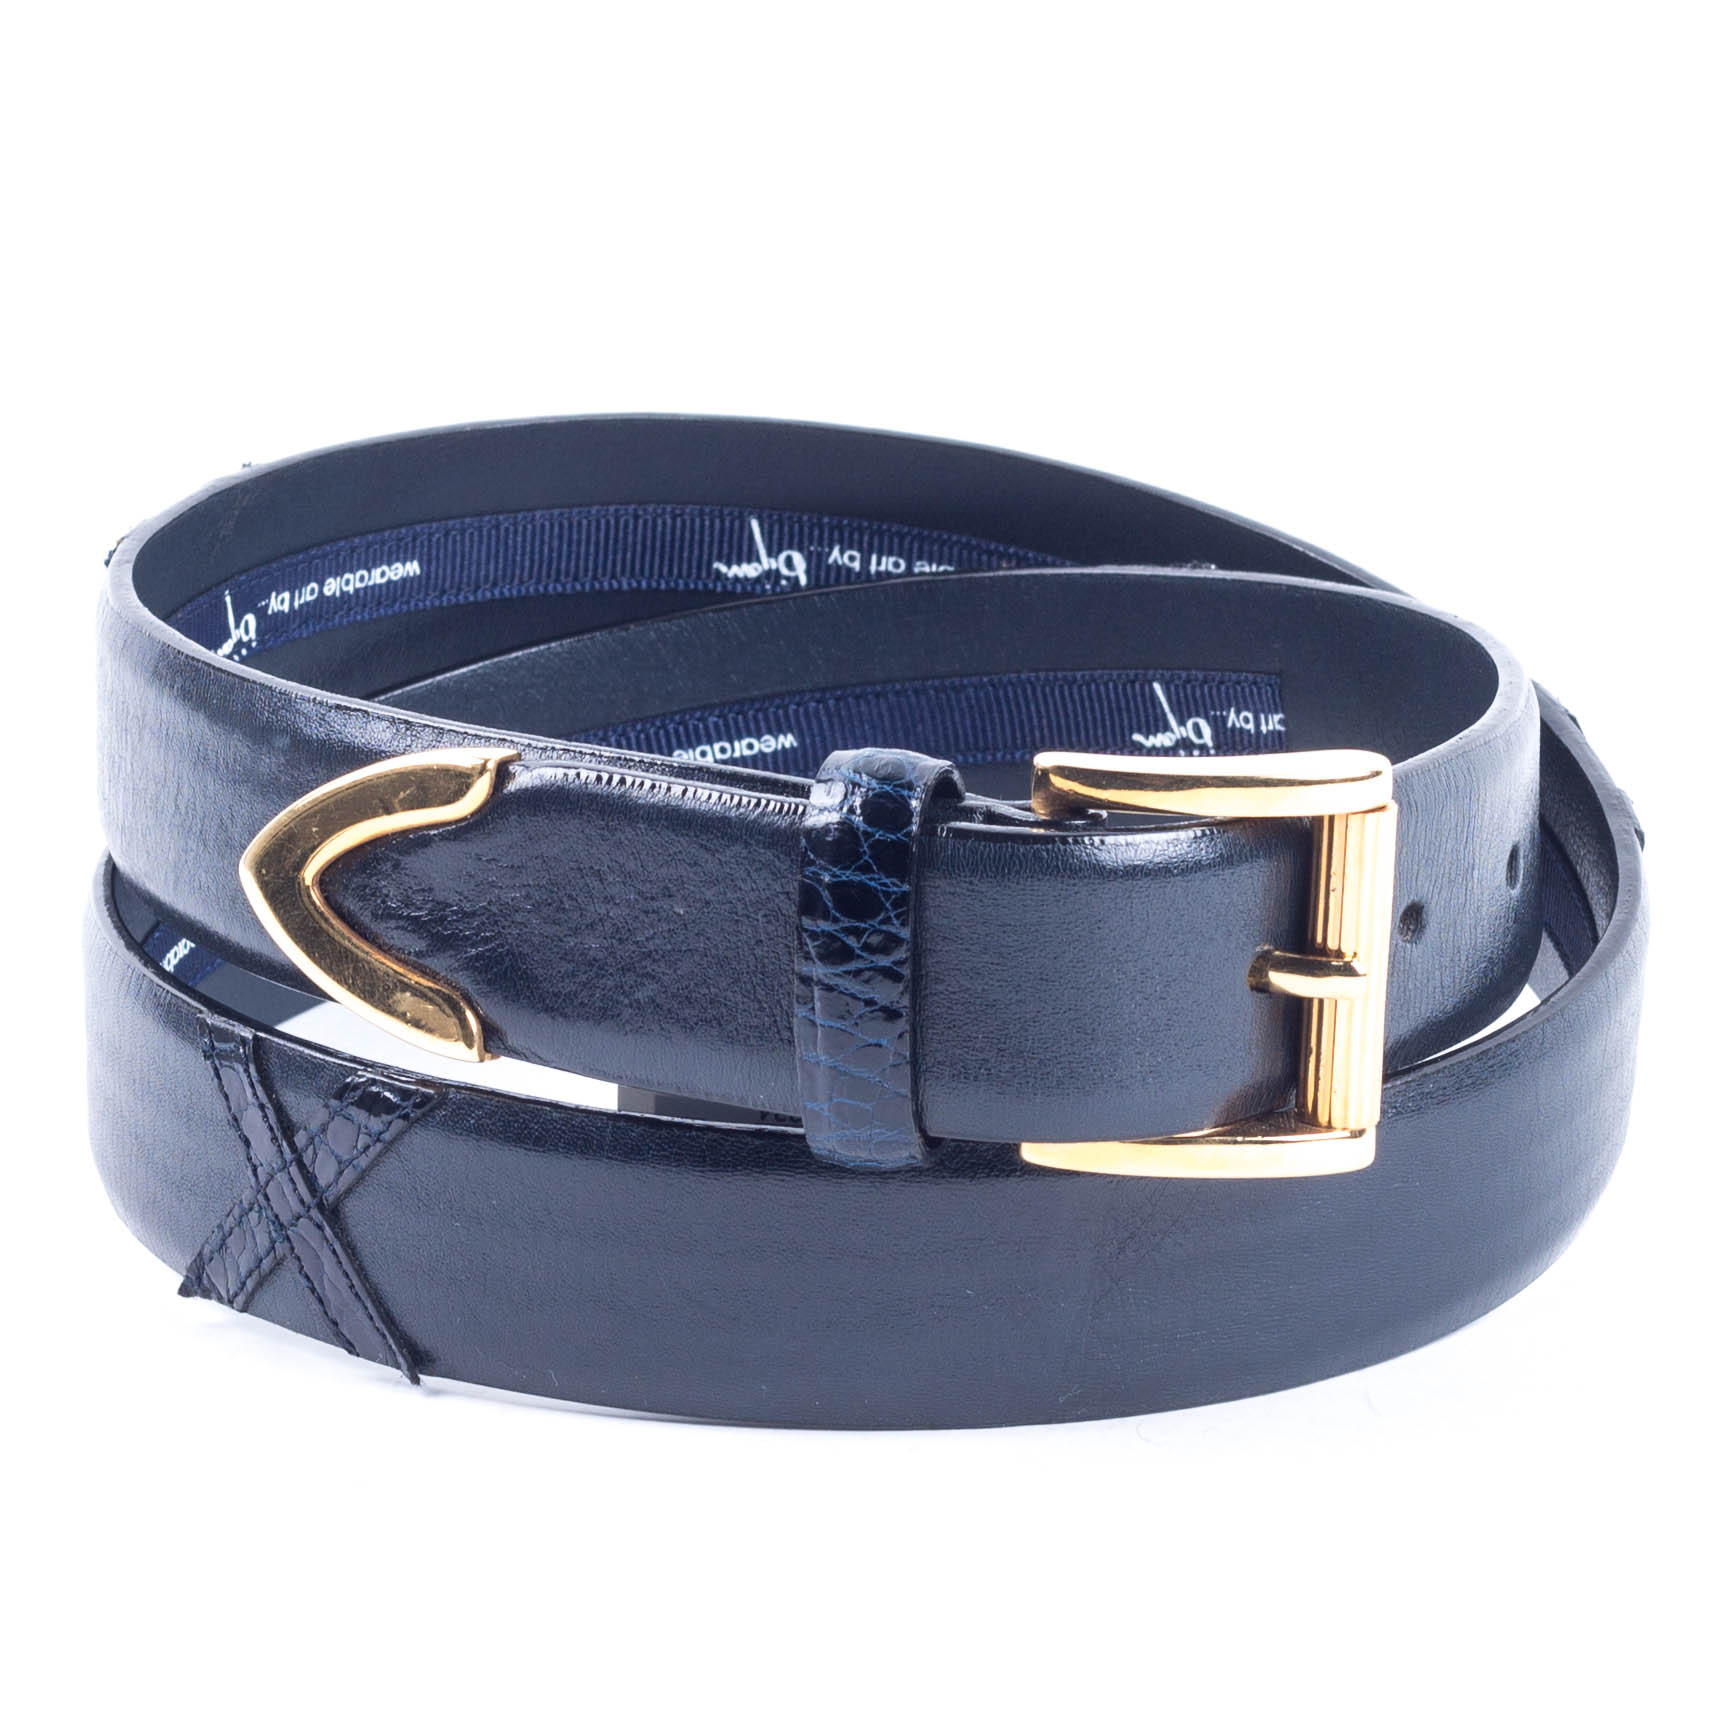 a belt with gold - toned hardware and black leather